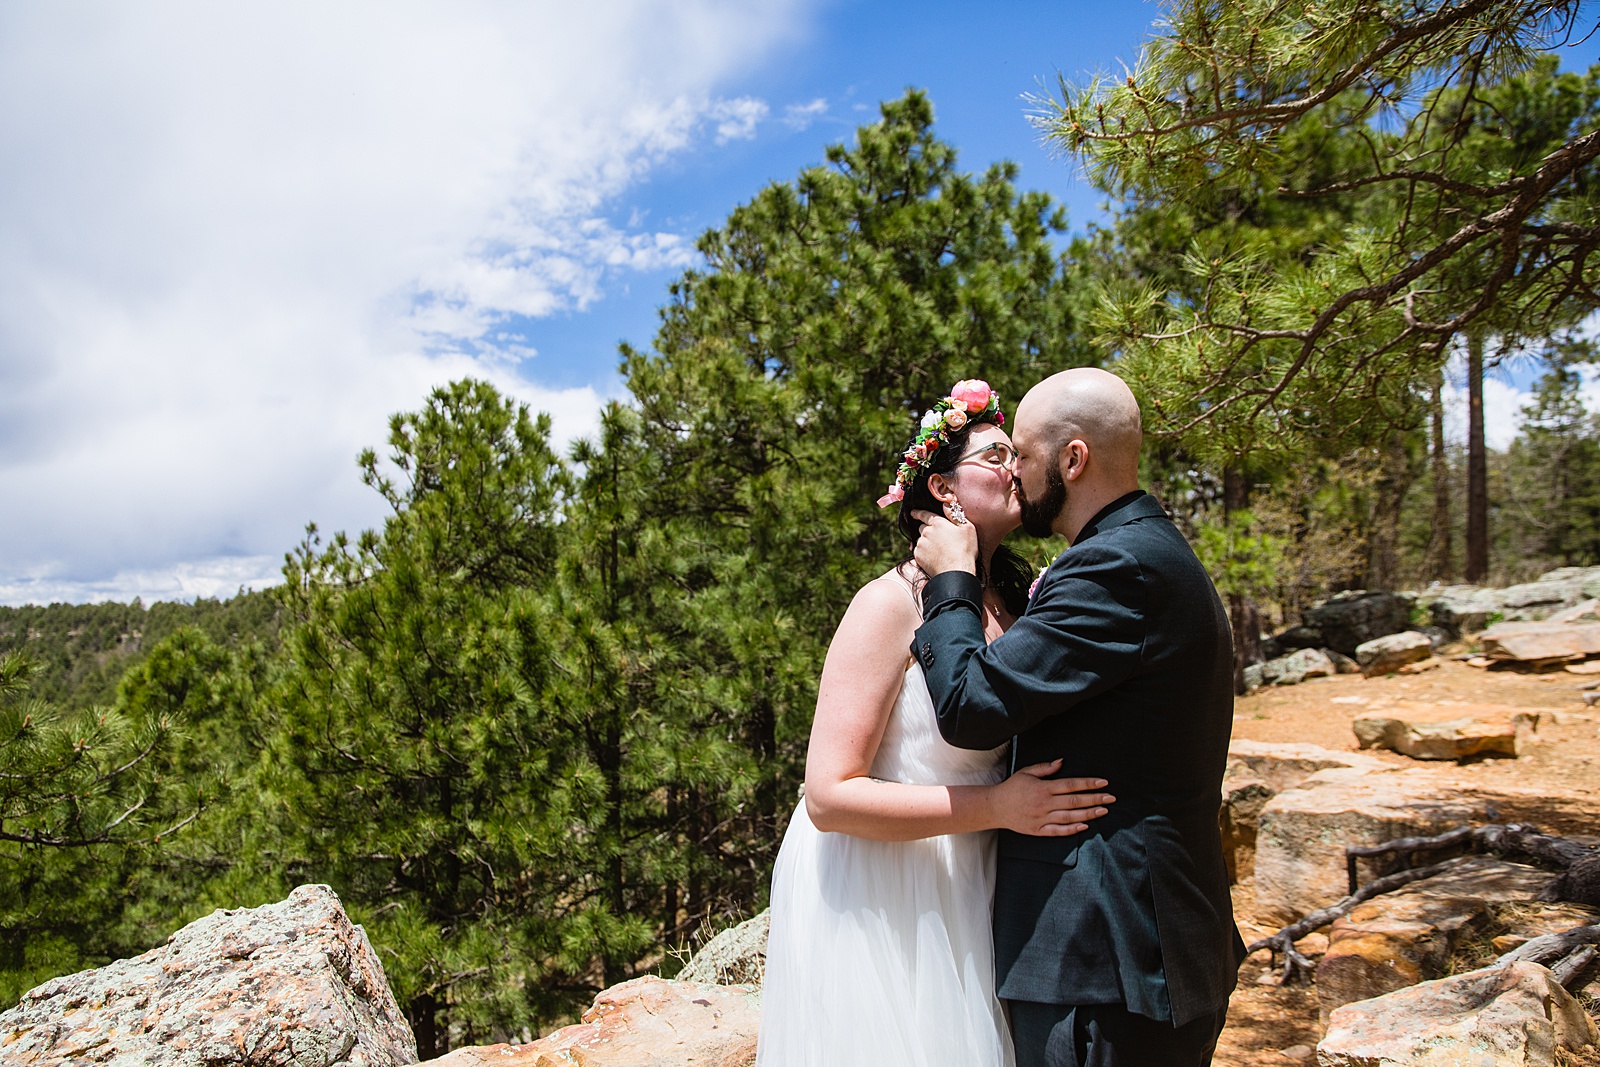 Bride & Groom share a kiss during their Mogollon Rim elopement by Arizona elopement photographer PMA Photography.